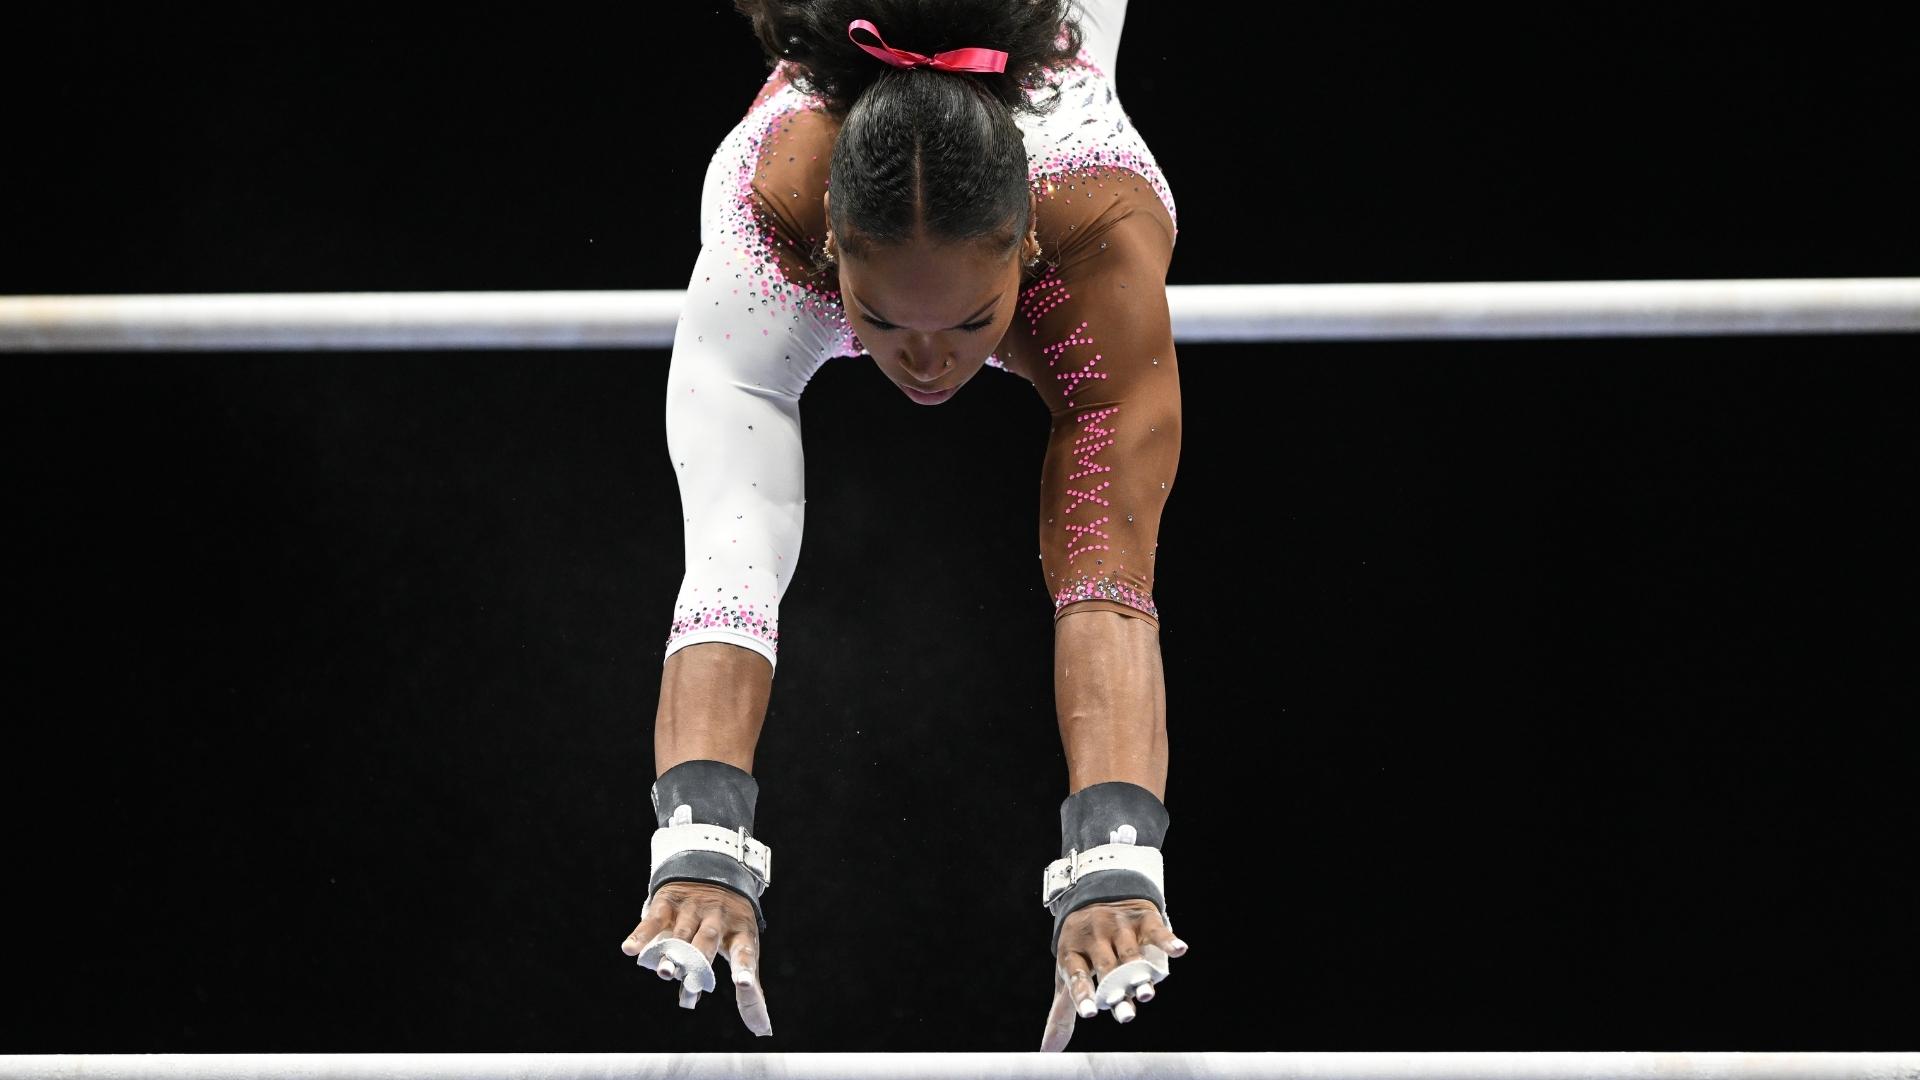 2022 OOFOS U.S. Gymnastics Championships: Shilese Jones honors dad, leads after Day 1